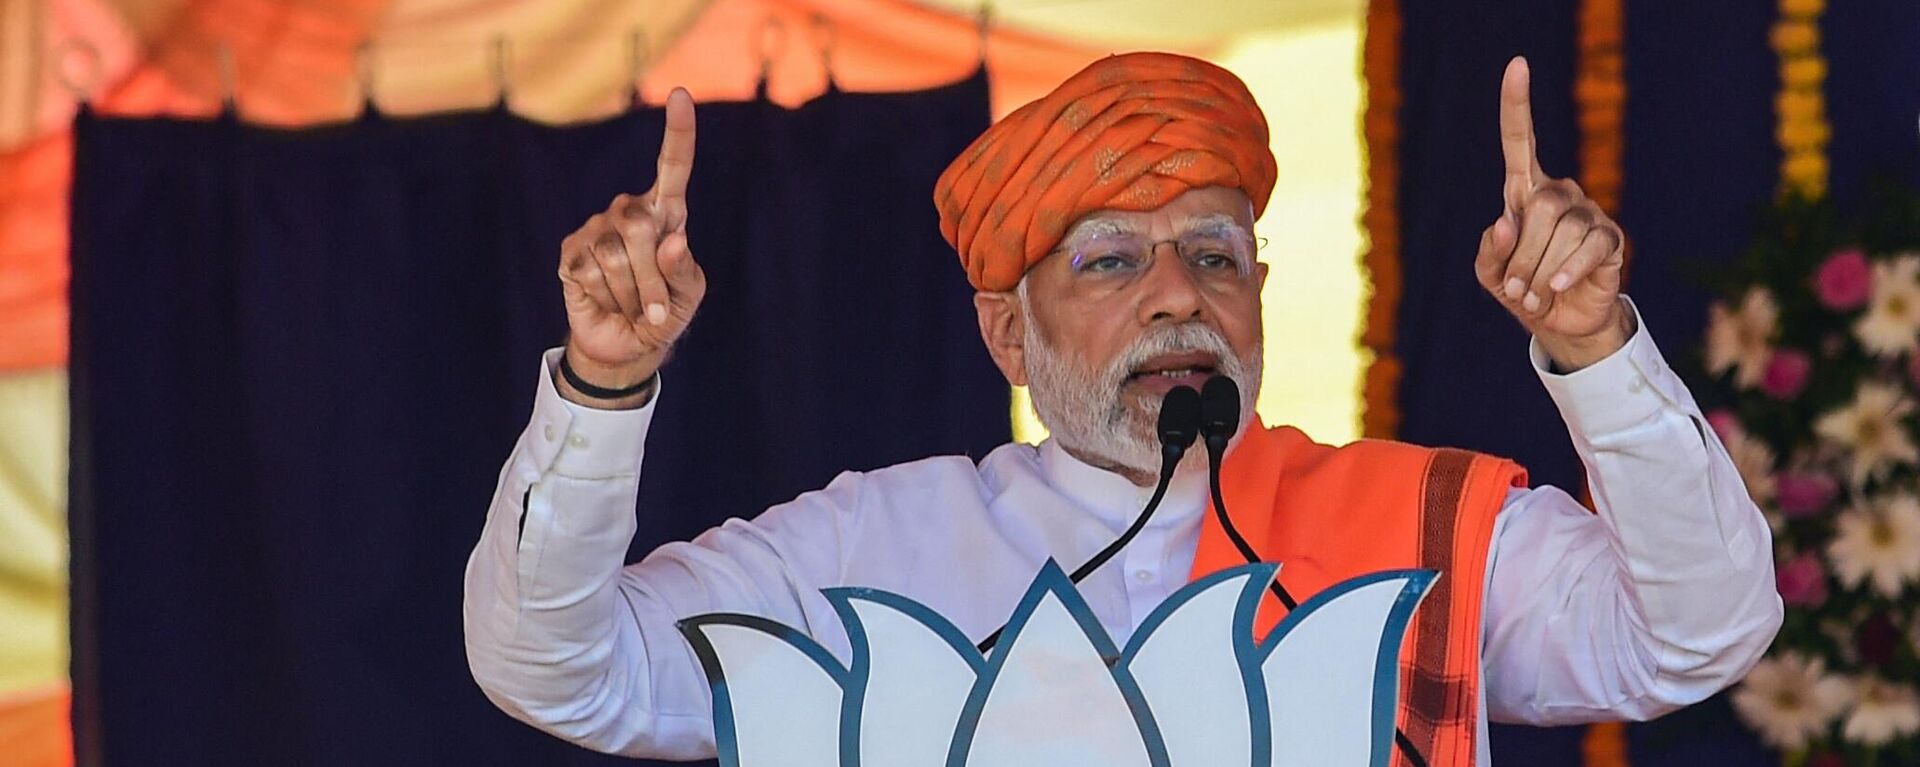 India's prime minister Narendra Modi (C) addresses a gathering during a Bhartiya Janata Party (BJP) rally ahead of Gujarat state elections at Dehgam, some 40 kms from Ahmedabad on November 24, 2022. - Sputnik International, 1920, 26.11.2022